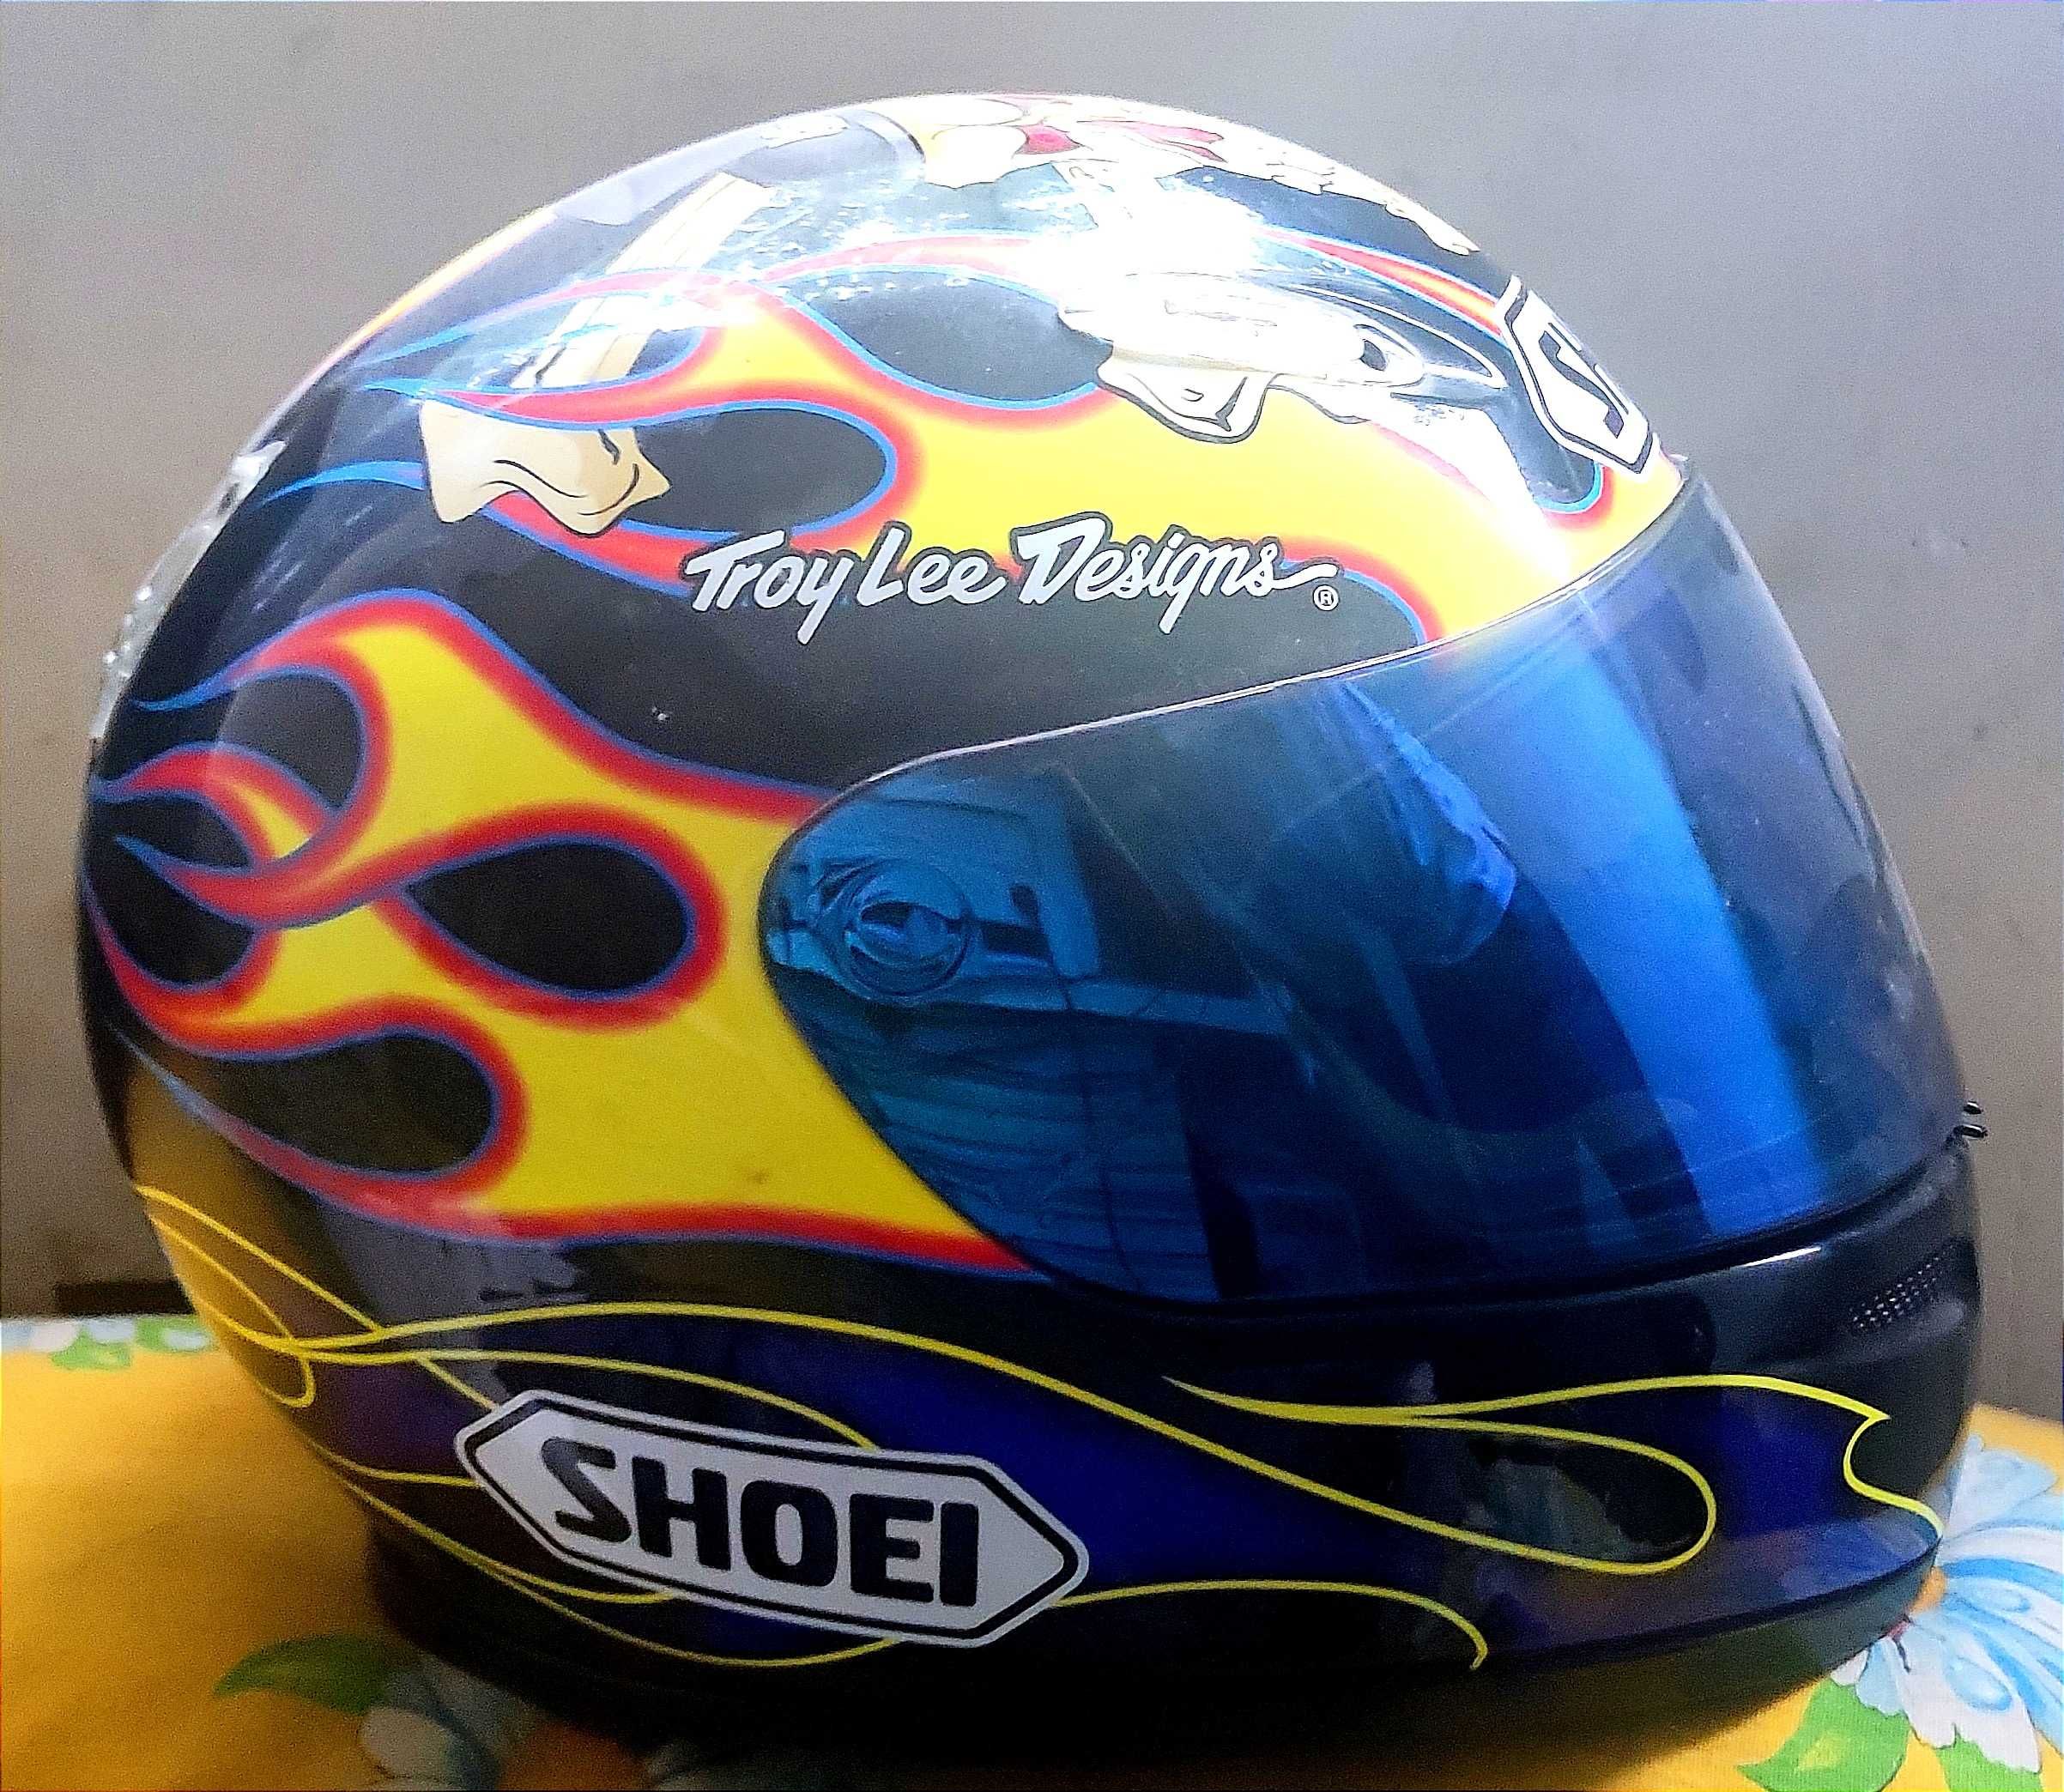 Мотошлем Shoei Z-two Troy Lee designs